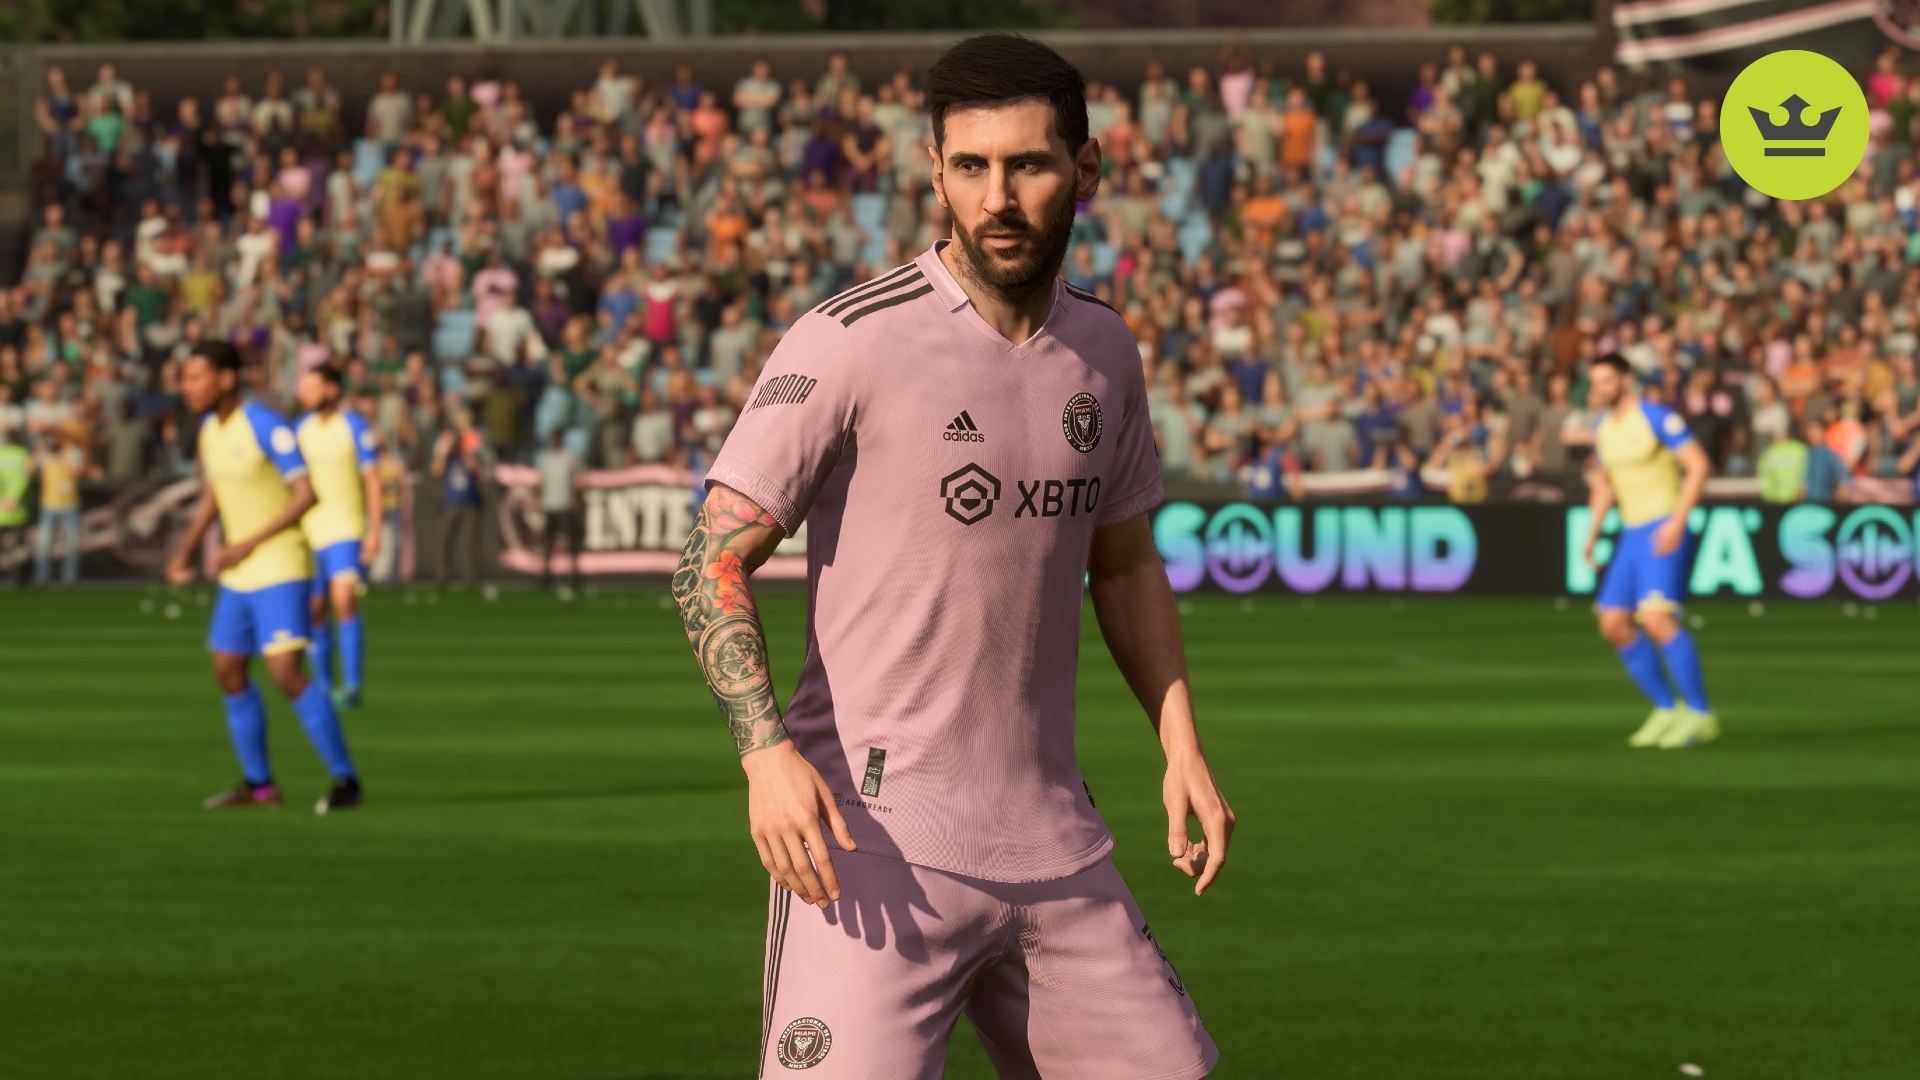 EA Sports FC release date and cover star - First details about